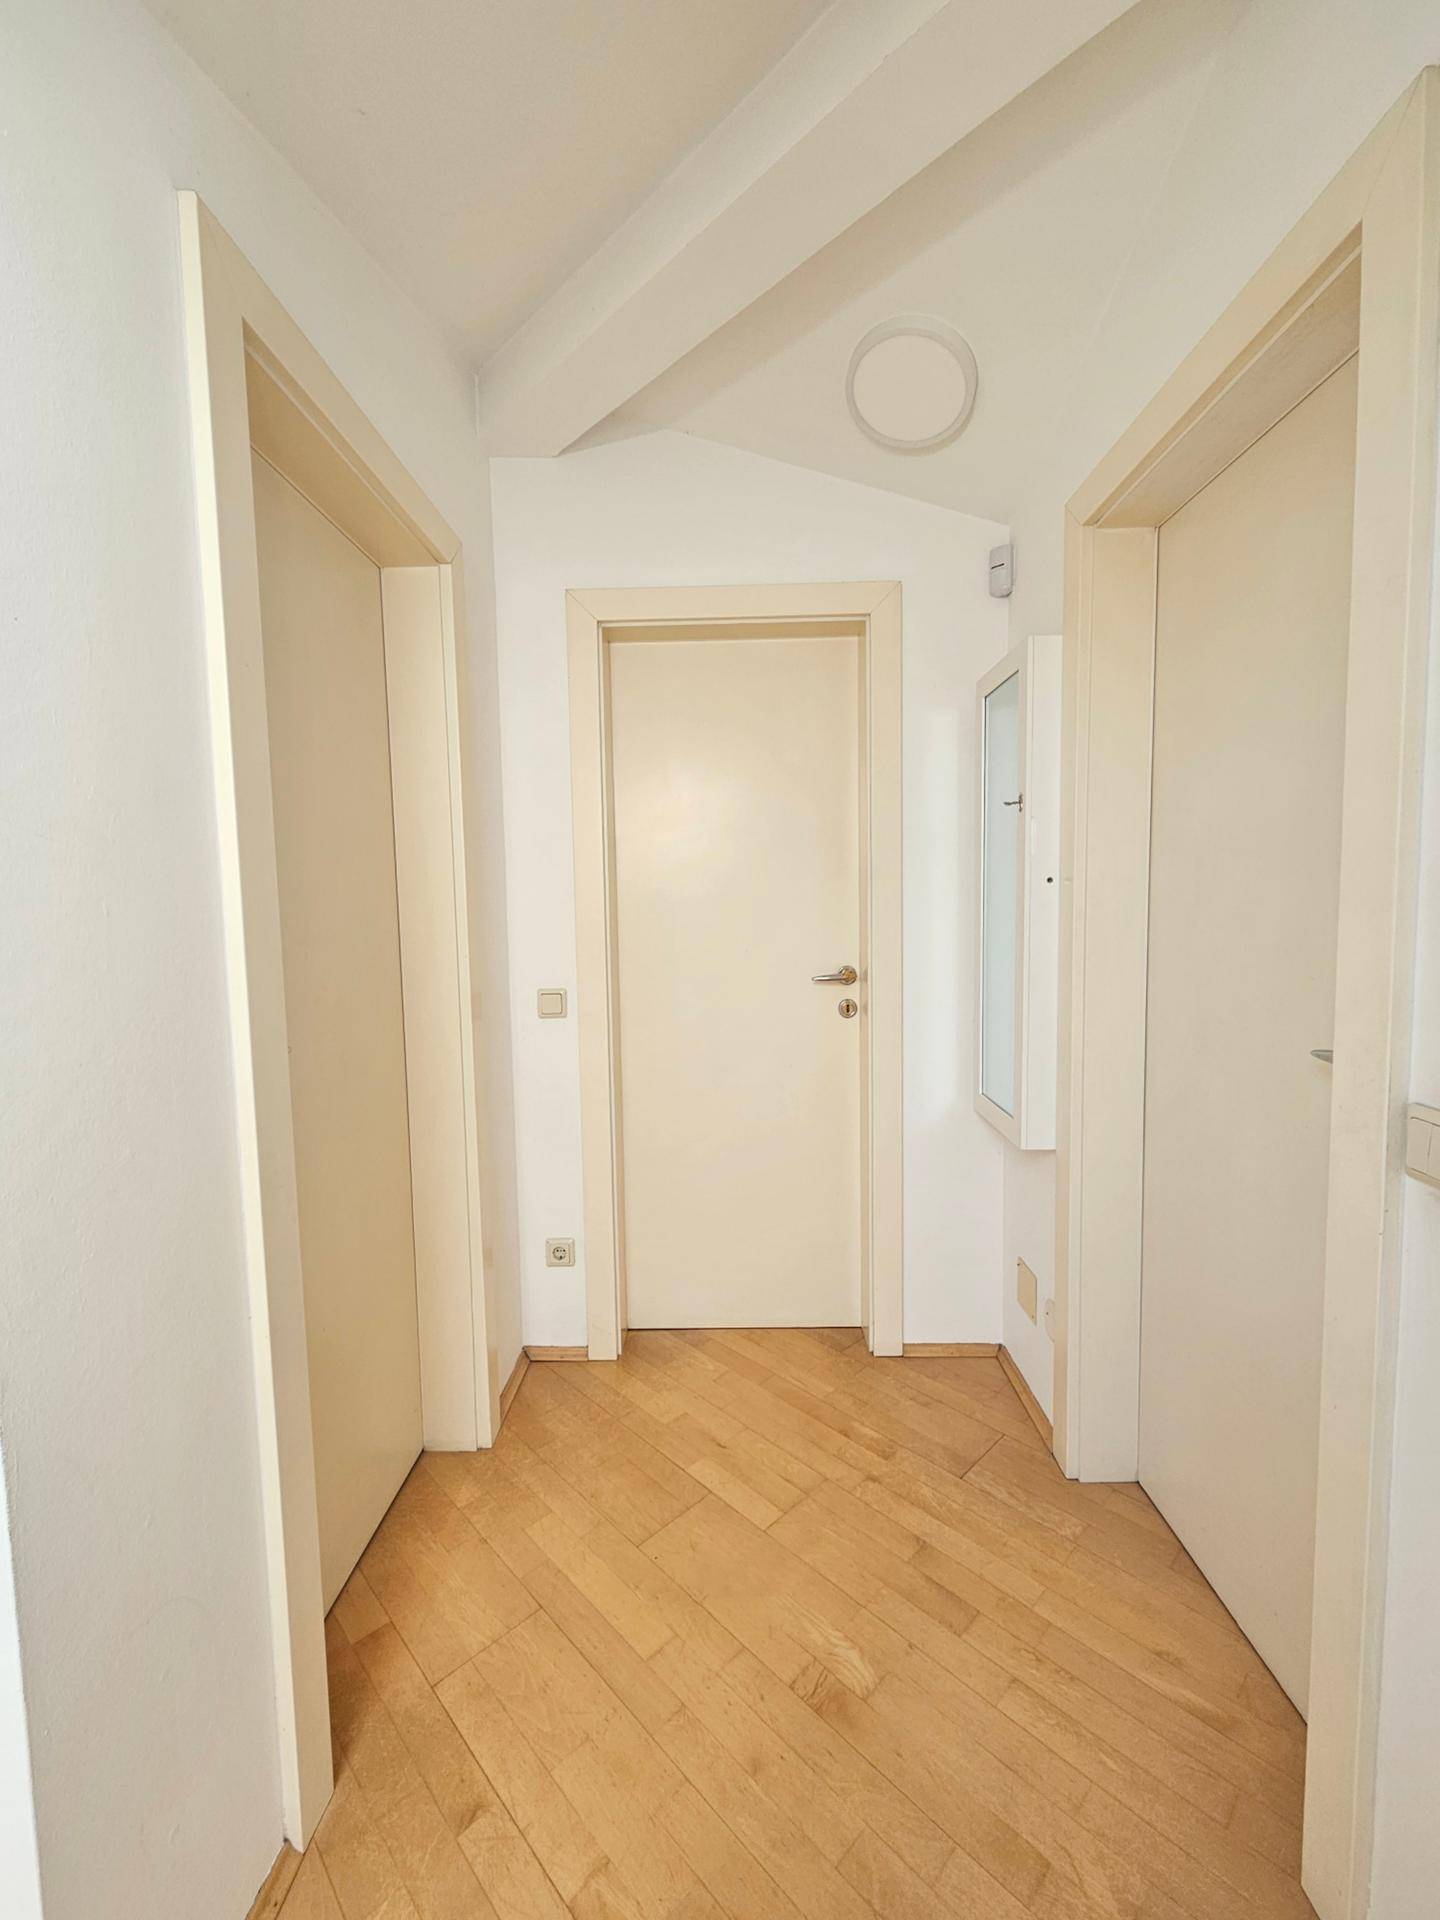 https://pictures.immobilienscout24.de/prod.www.immobilienscout24.at/pictureserver/loadPicture?q=70&id=012.001P900000BQuGR-fcaabfcdabb54c9c891594bfb2ade960